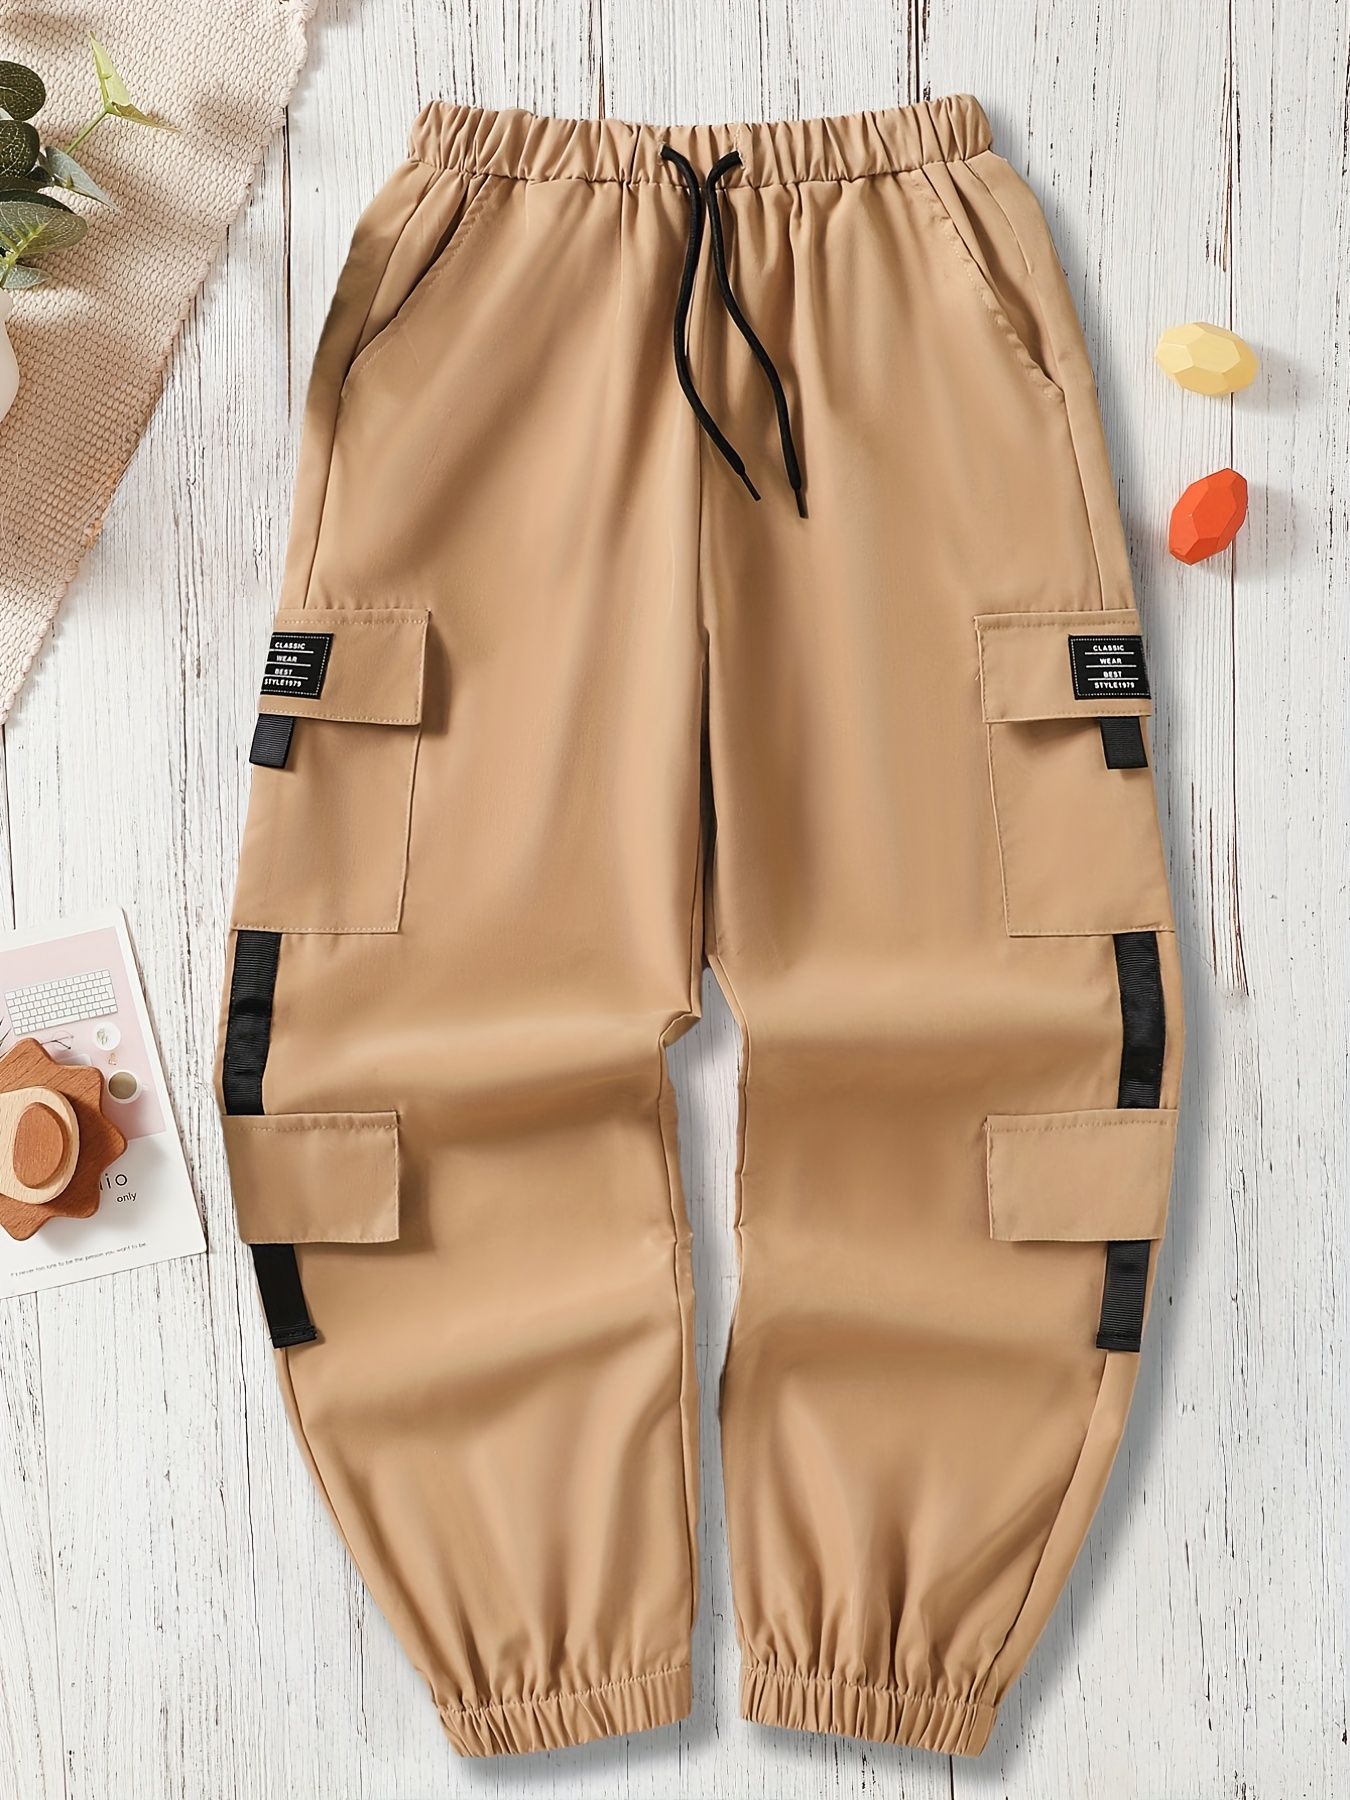 Wholesale Boys Kids Clothing Outfits Sports Cargo Pants Elastic High Waist  Hip Hop Overalls Jogger Trousers From m.alibaba.com